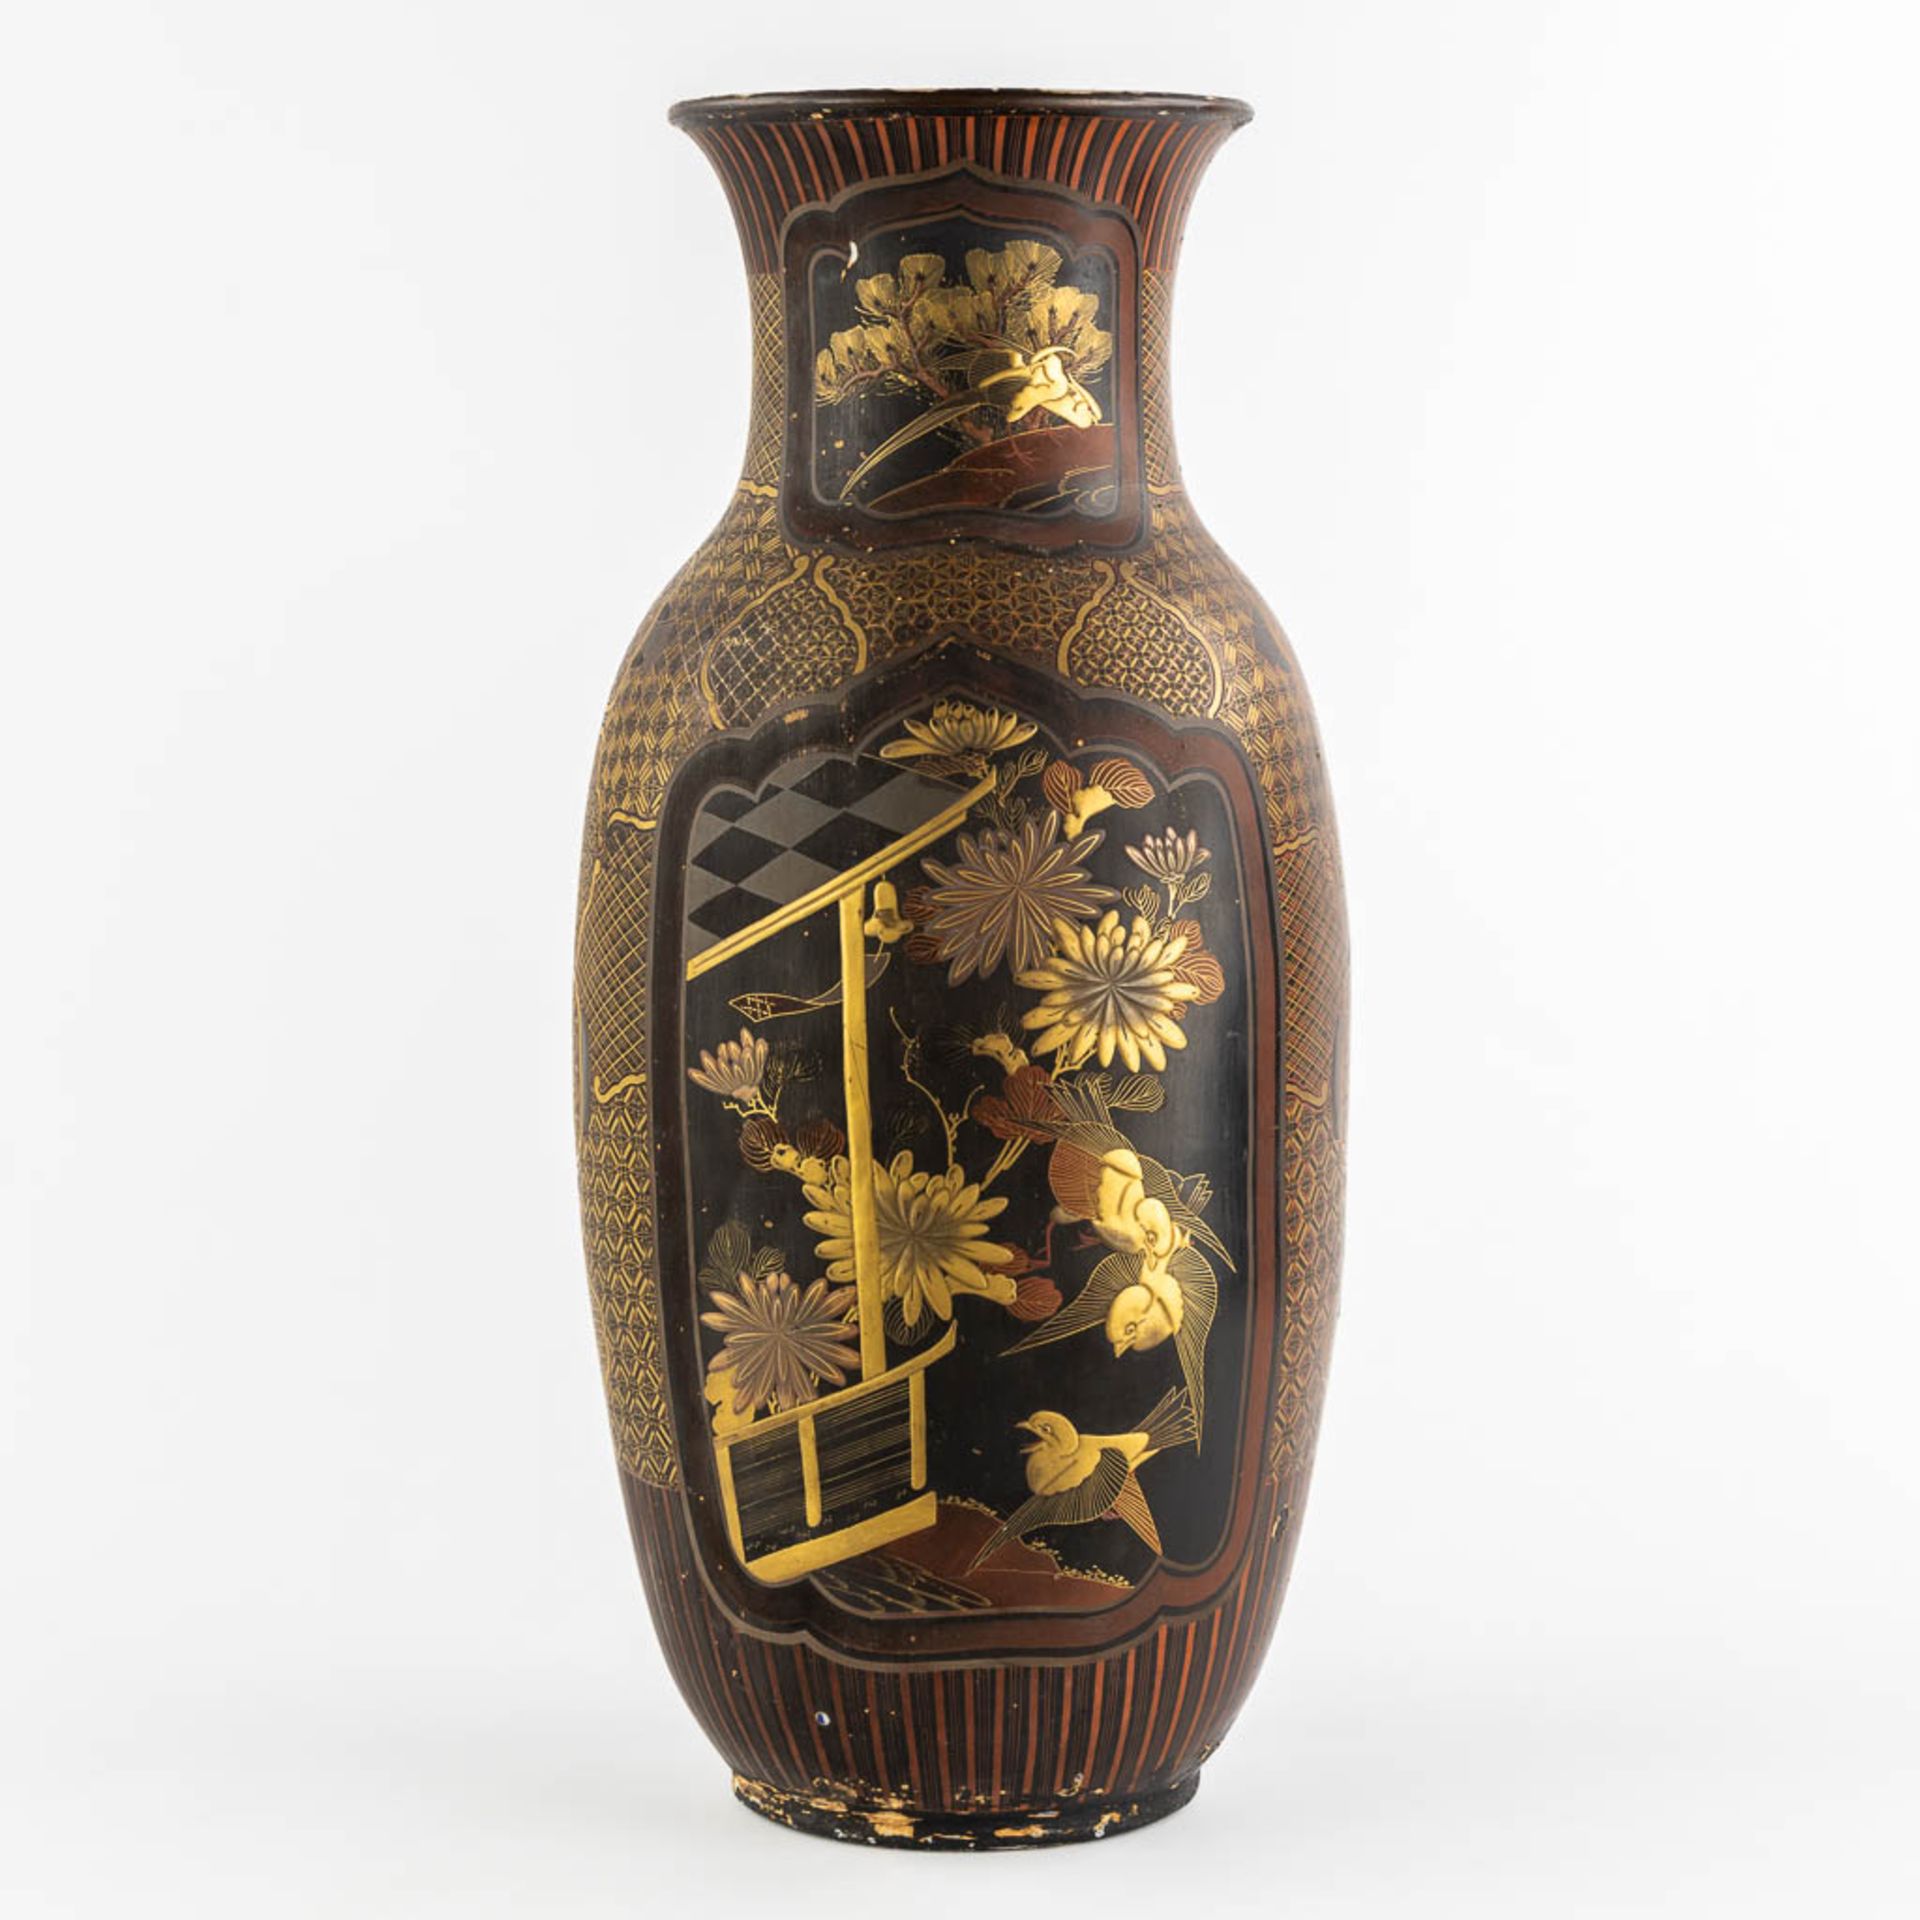 A Japanese porcelain vase, finished with red and gold lacquer. Meij period. (H:61 x D:27 cm) - Bild 5 aus 14